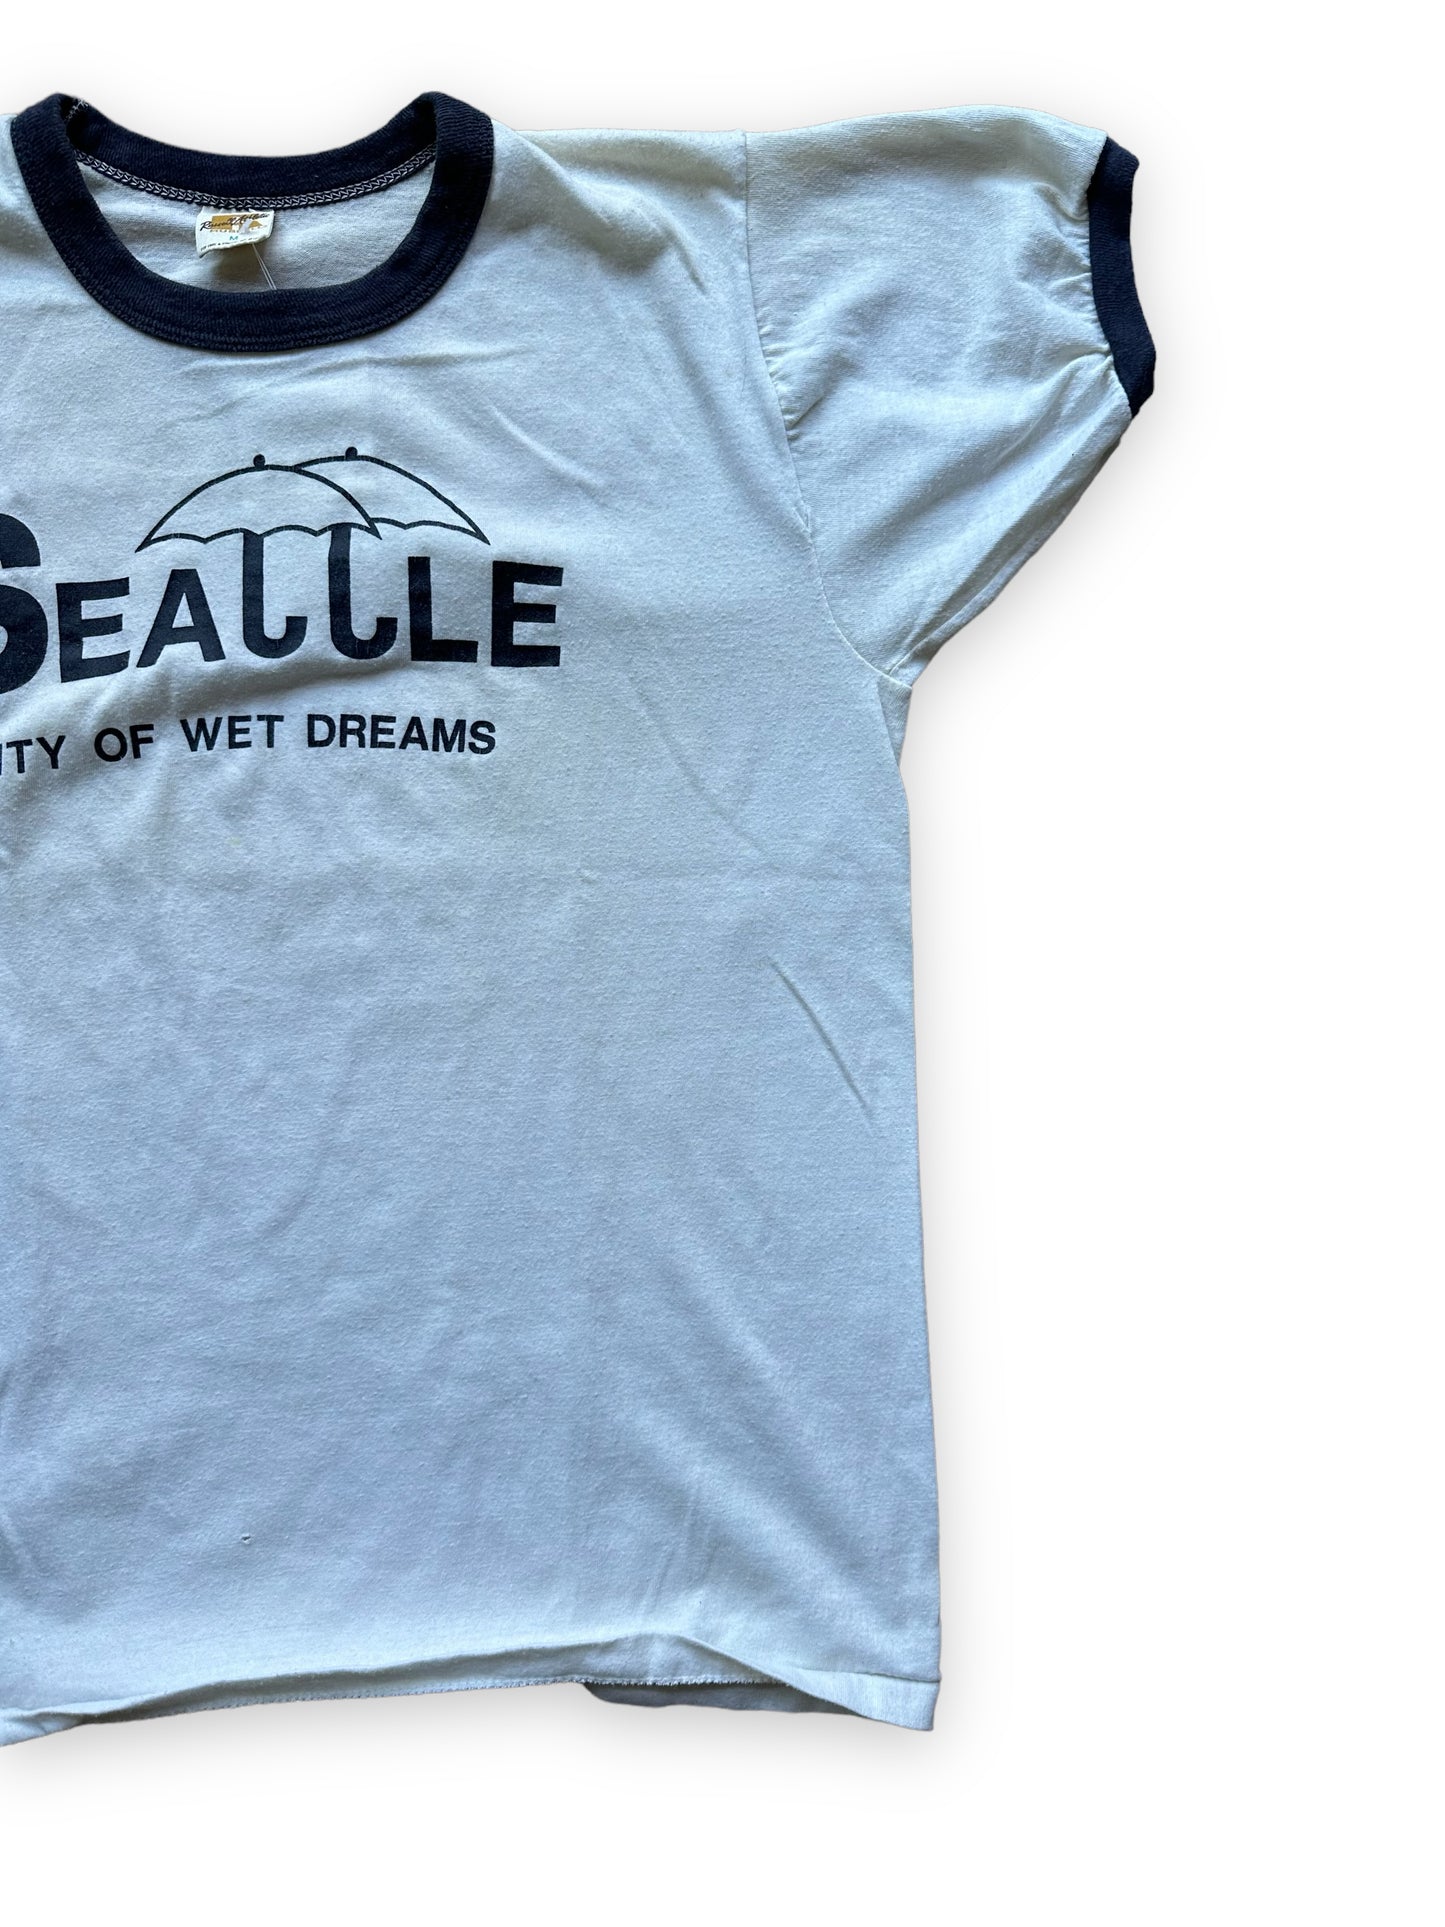 Left Front View of Vintage Seattle City of Wet Dreams Ringer Tee SZ M |  Vintage Russell Athletic T Shirt | Barn Owl Vintage Seattle